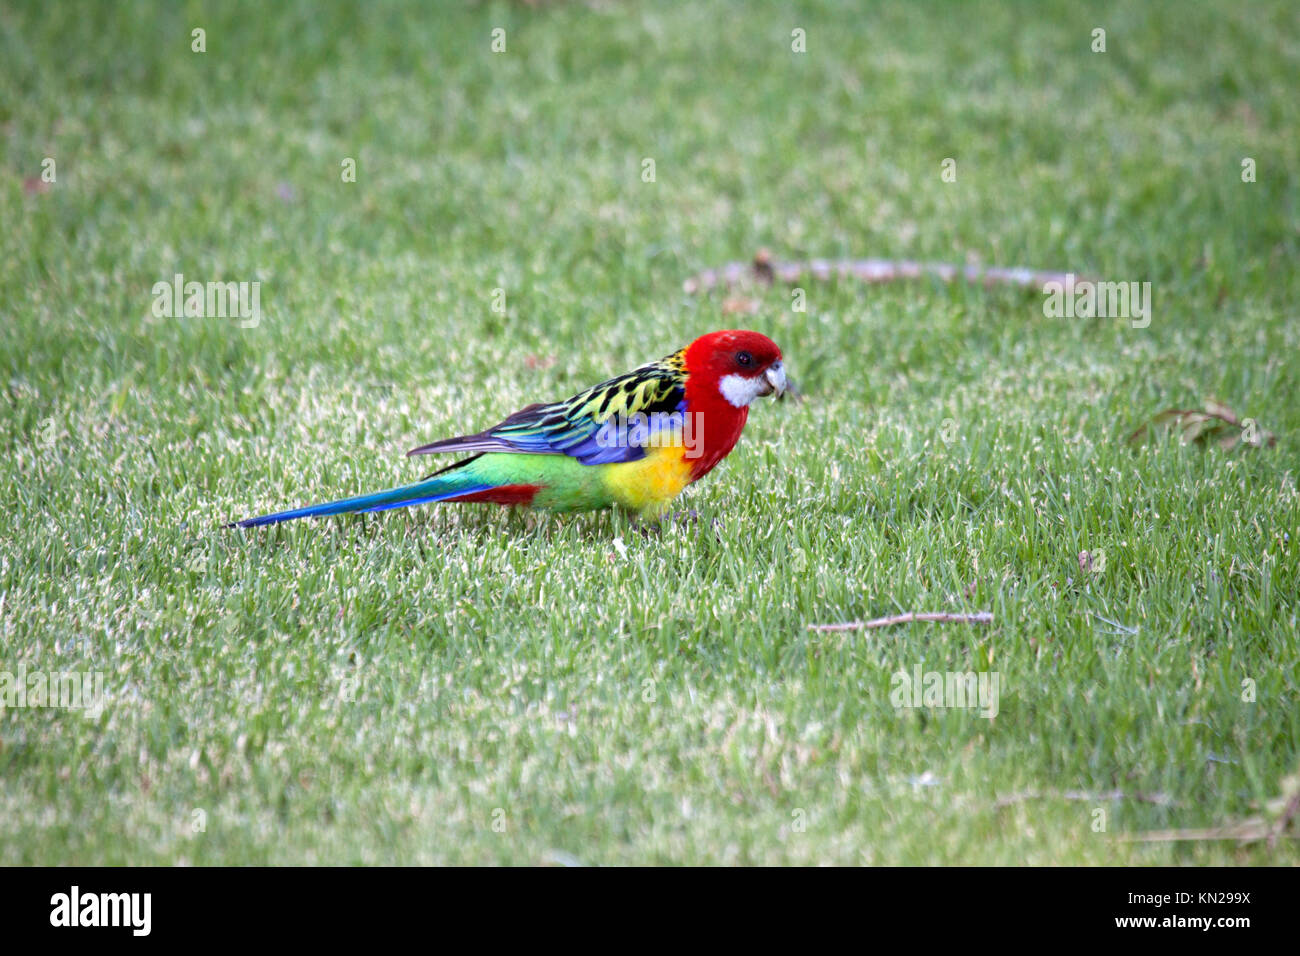 Eastern rosella foraging in grass in Picton New South Wales Australia Stock Photo